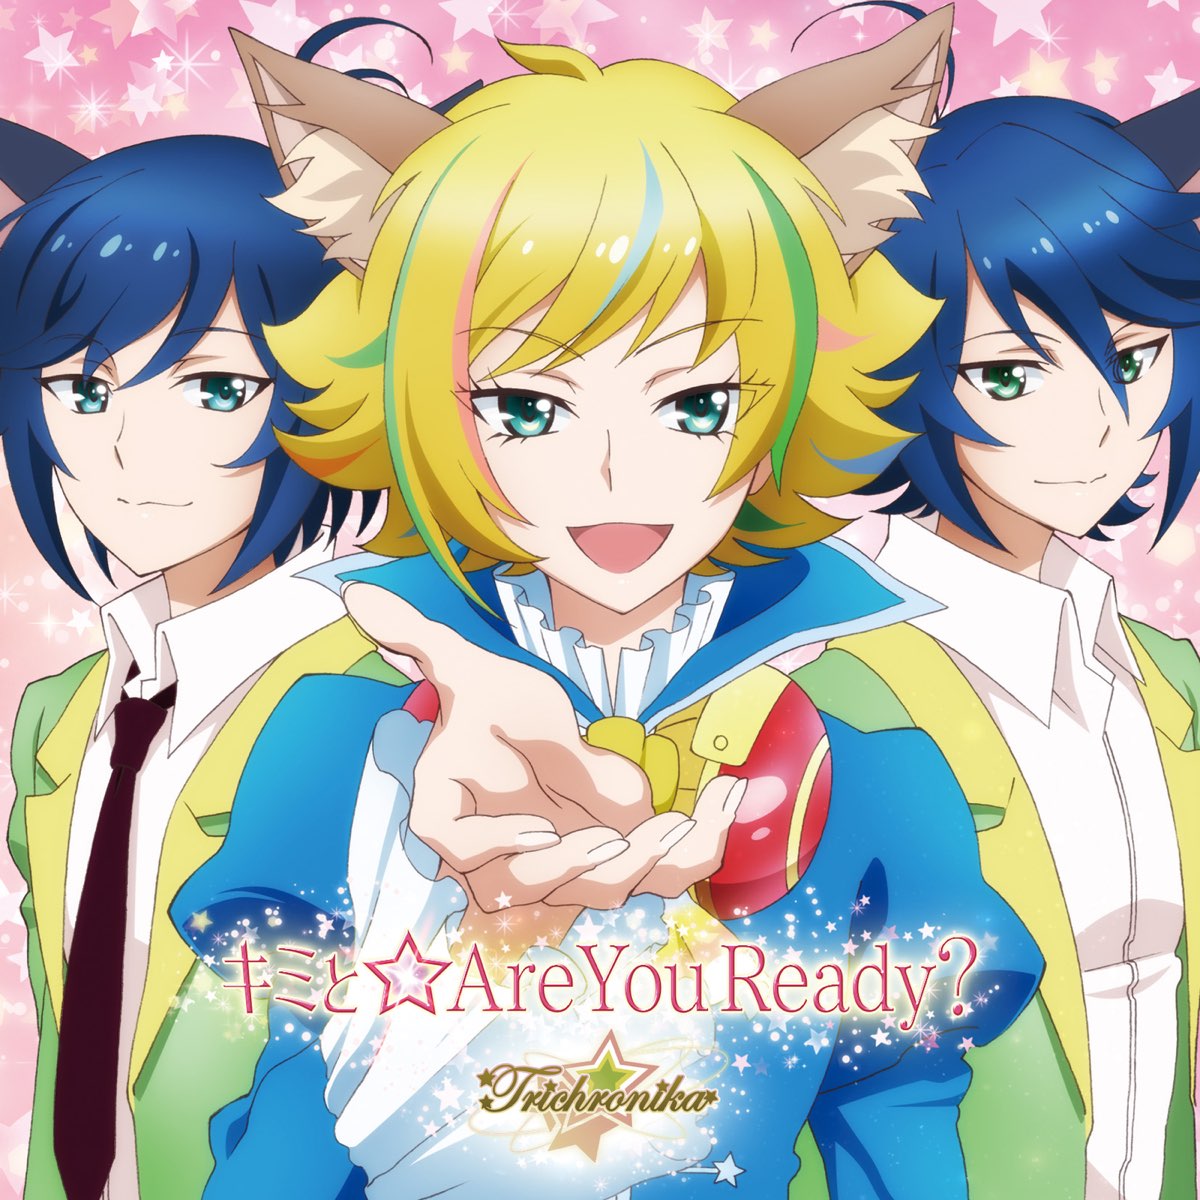 Kimi To Are You Ready From Tv Anime Show By Rock By Trichronika Ep By トライクロニカ Cv 宮野真守 村瀬歩 逢坂良太 On Apple Music